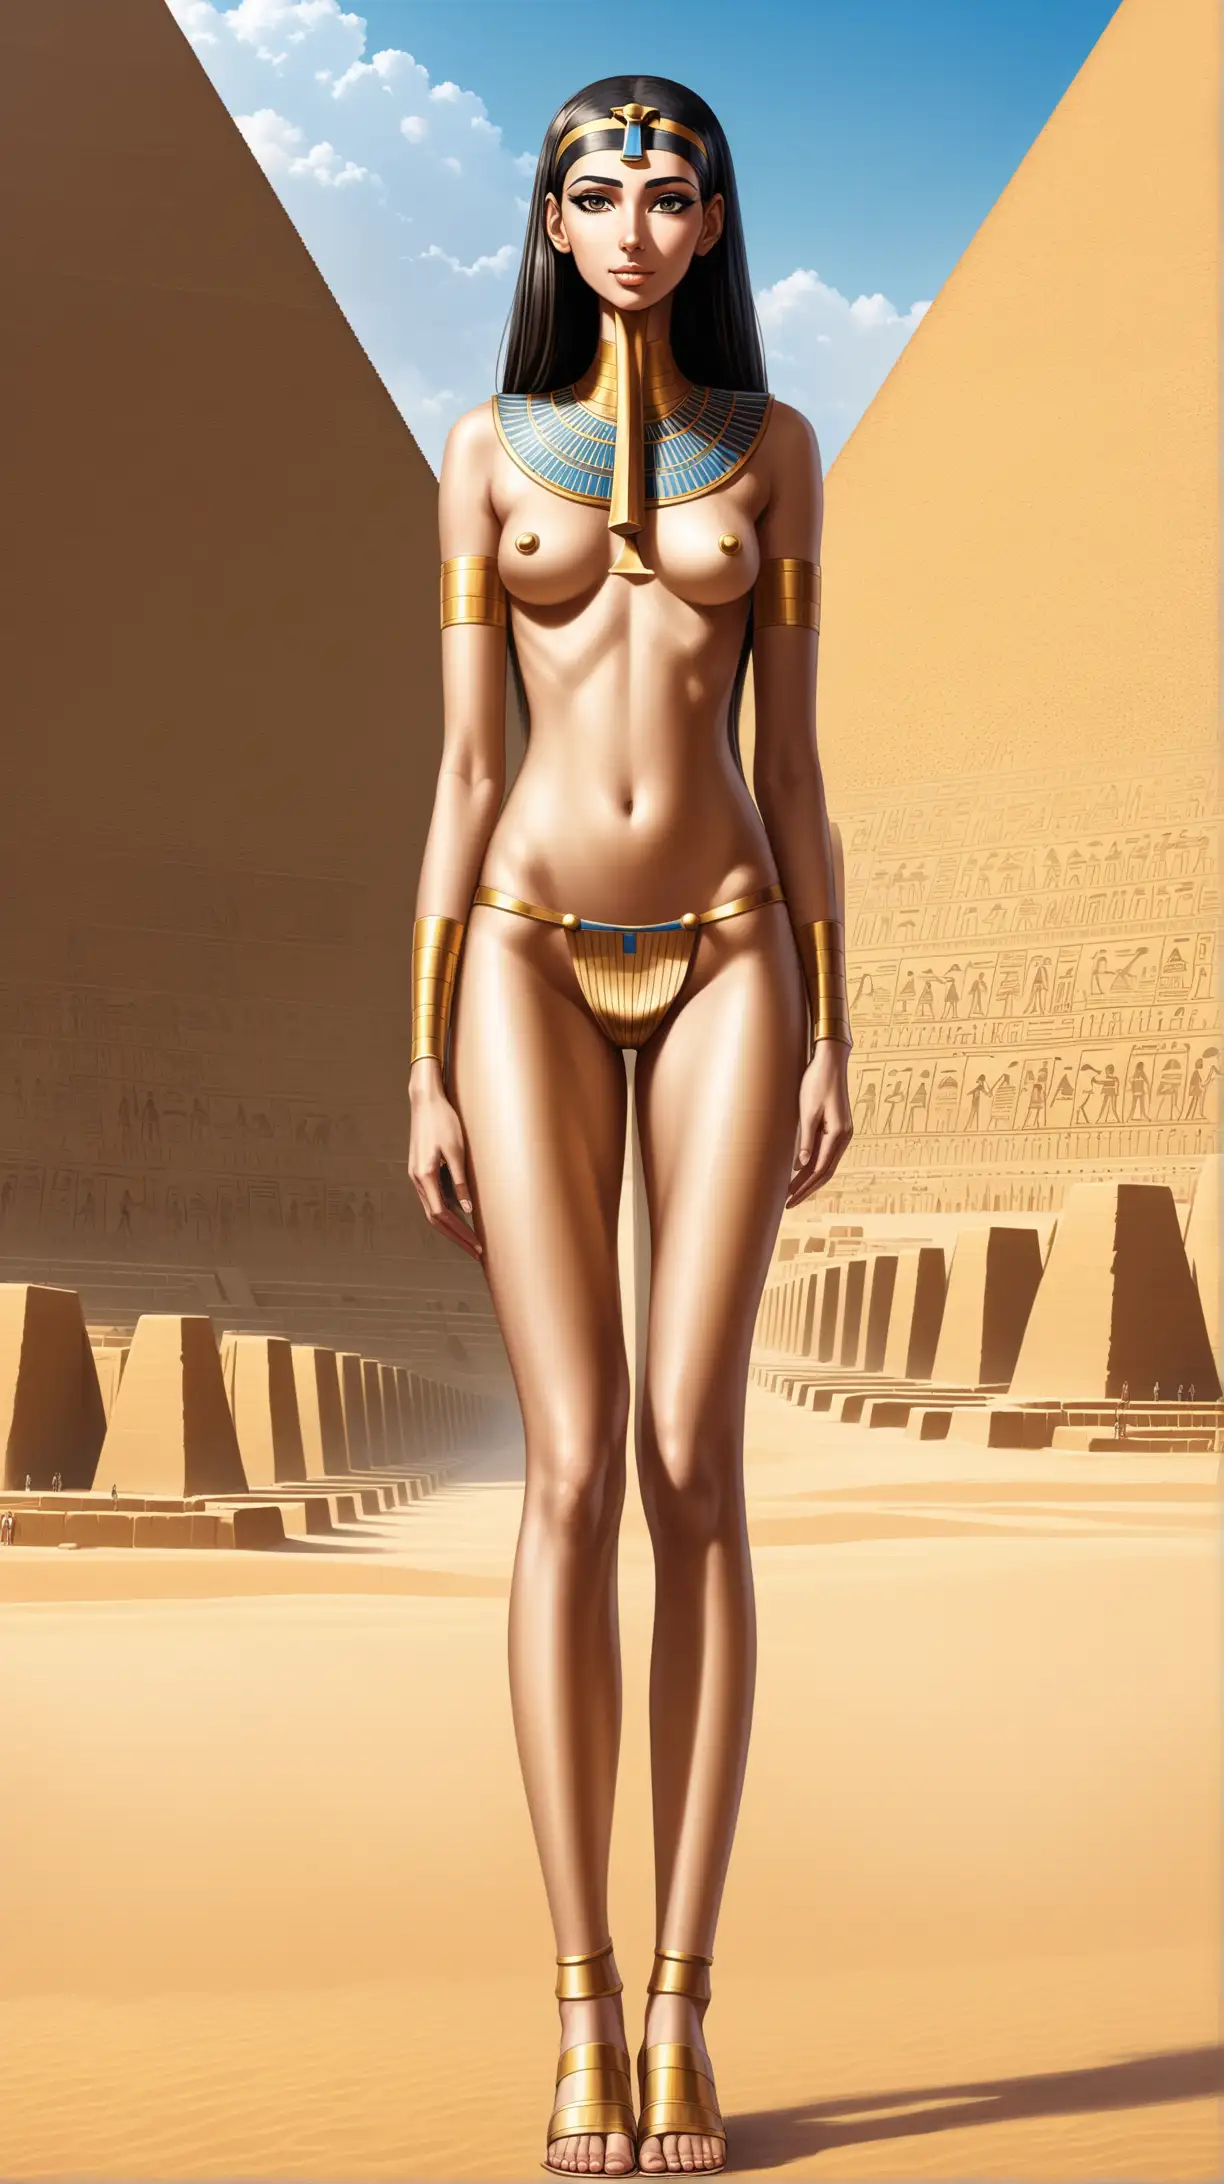 Towering Egyptian Maiden Enigmatic Beauty by the Pyramid